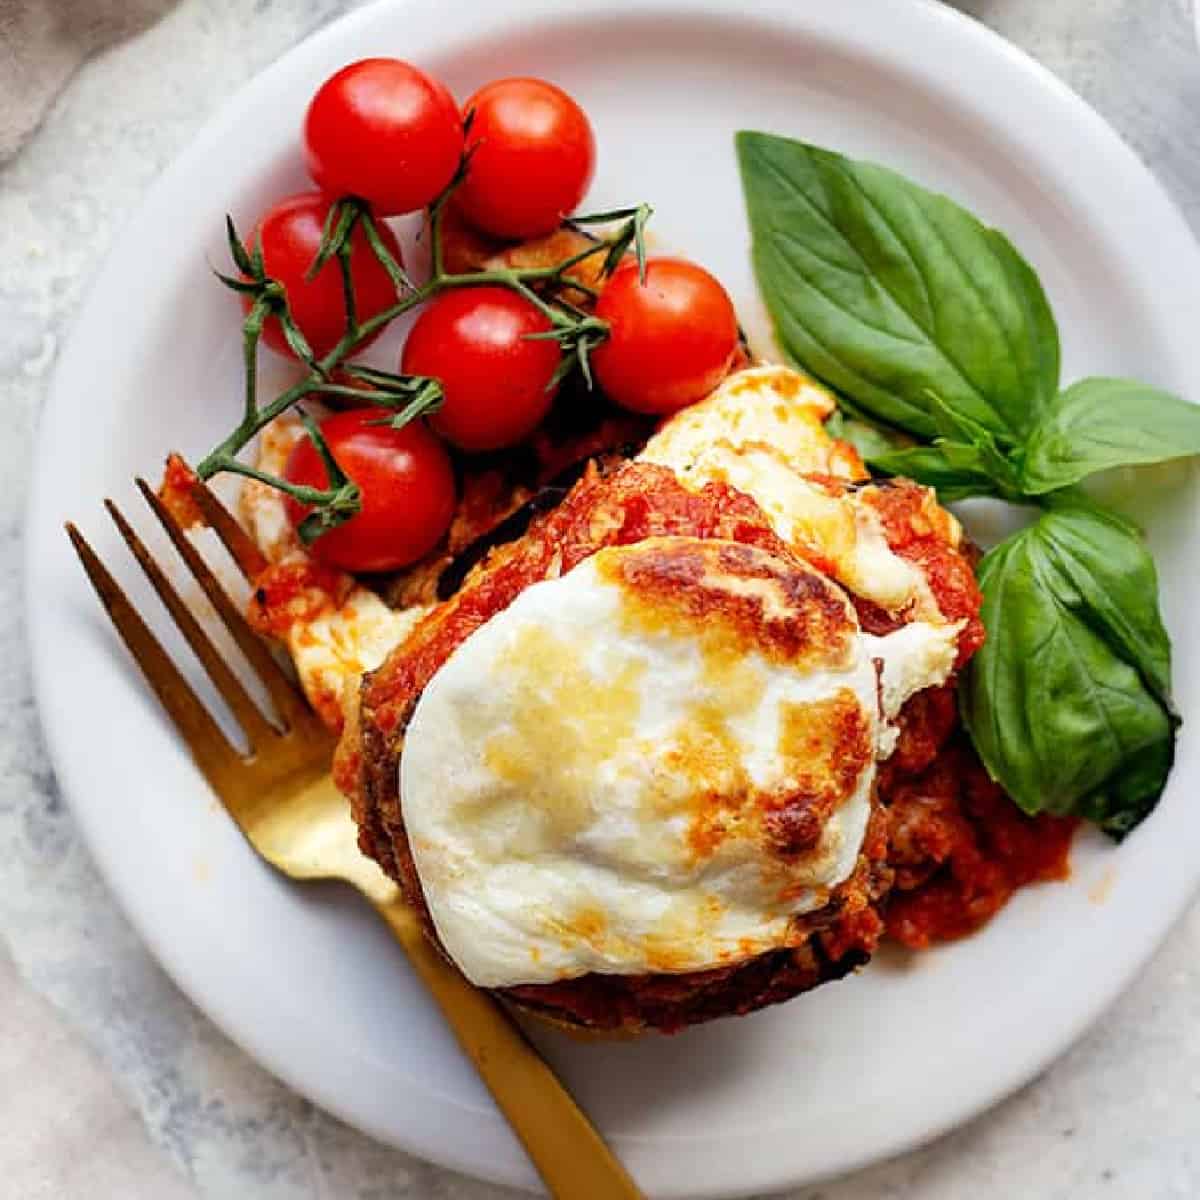 This eggplant parmesan recipe is a classic for good reasons. You can't go wrong with layers of eggplant, cheese and marinara sauce. Learn how to make this eggplant casserole with this easy tutorial (including a special tip that makes this dish special!) and how-to video. 
